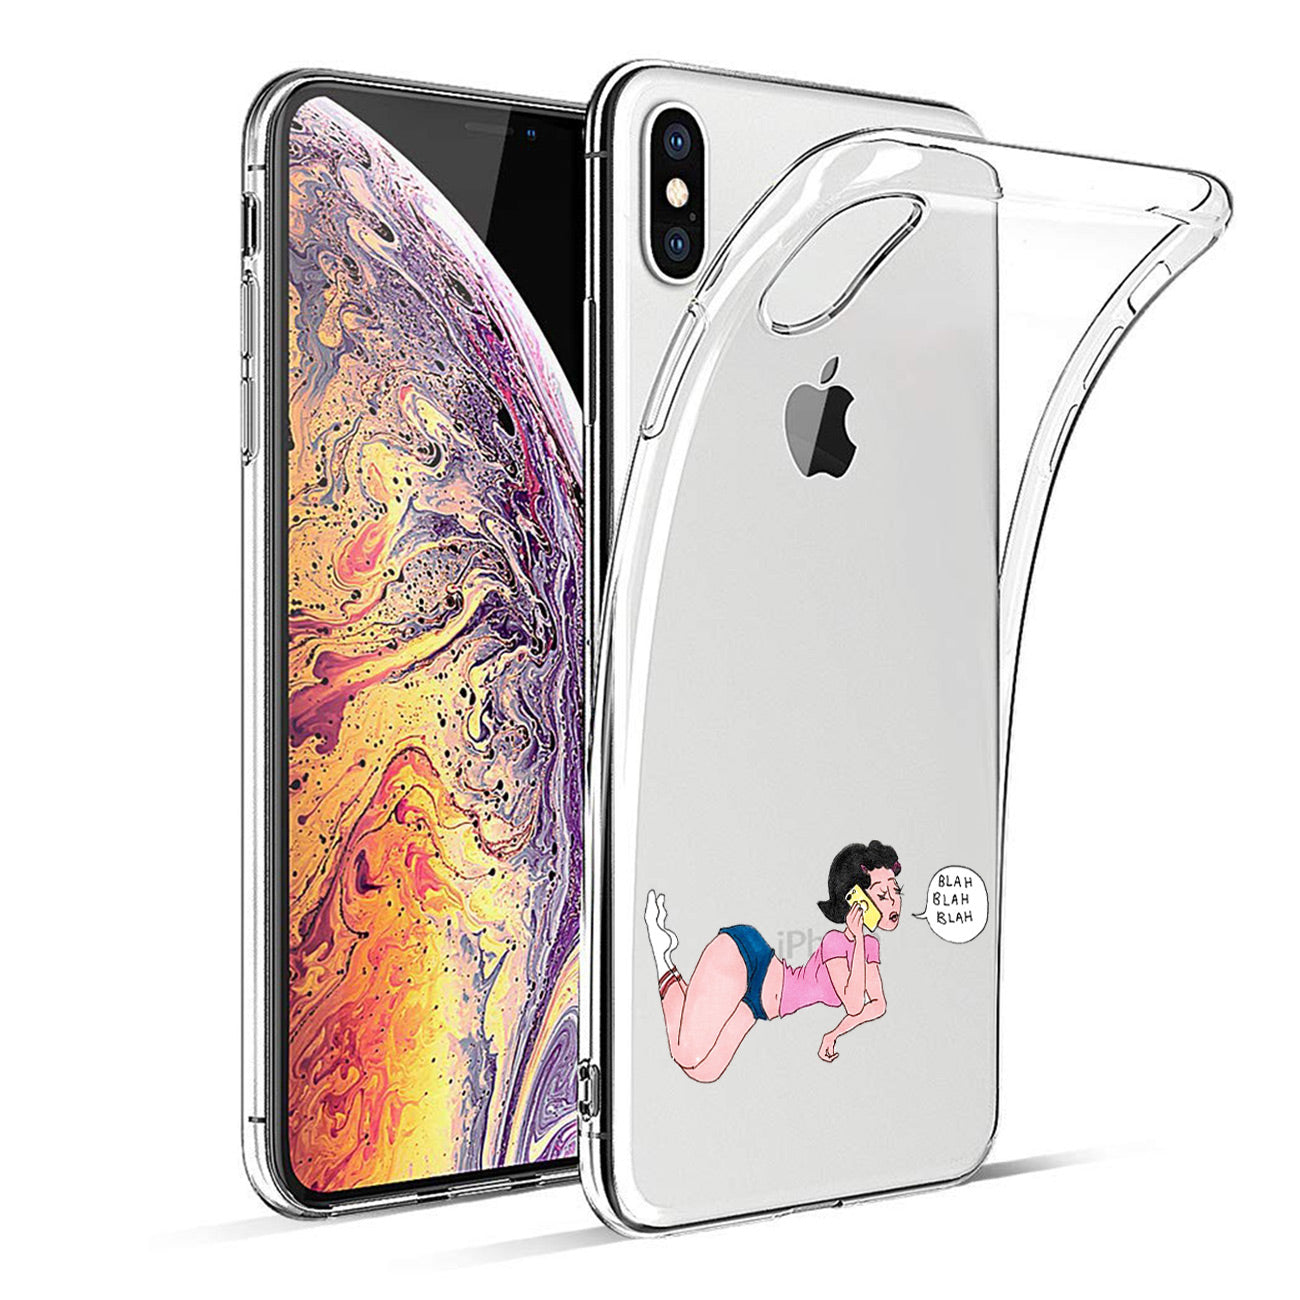 Reiko Apple iPhone XS MAX Design Air Cushion Case With Lady Design